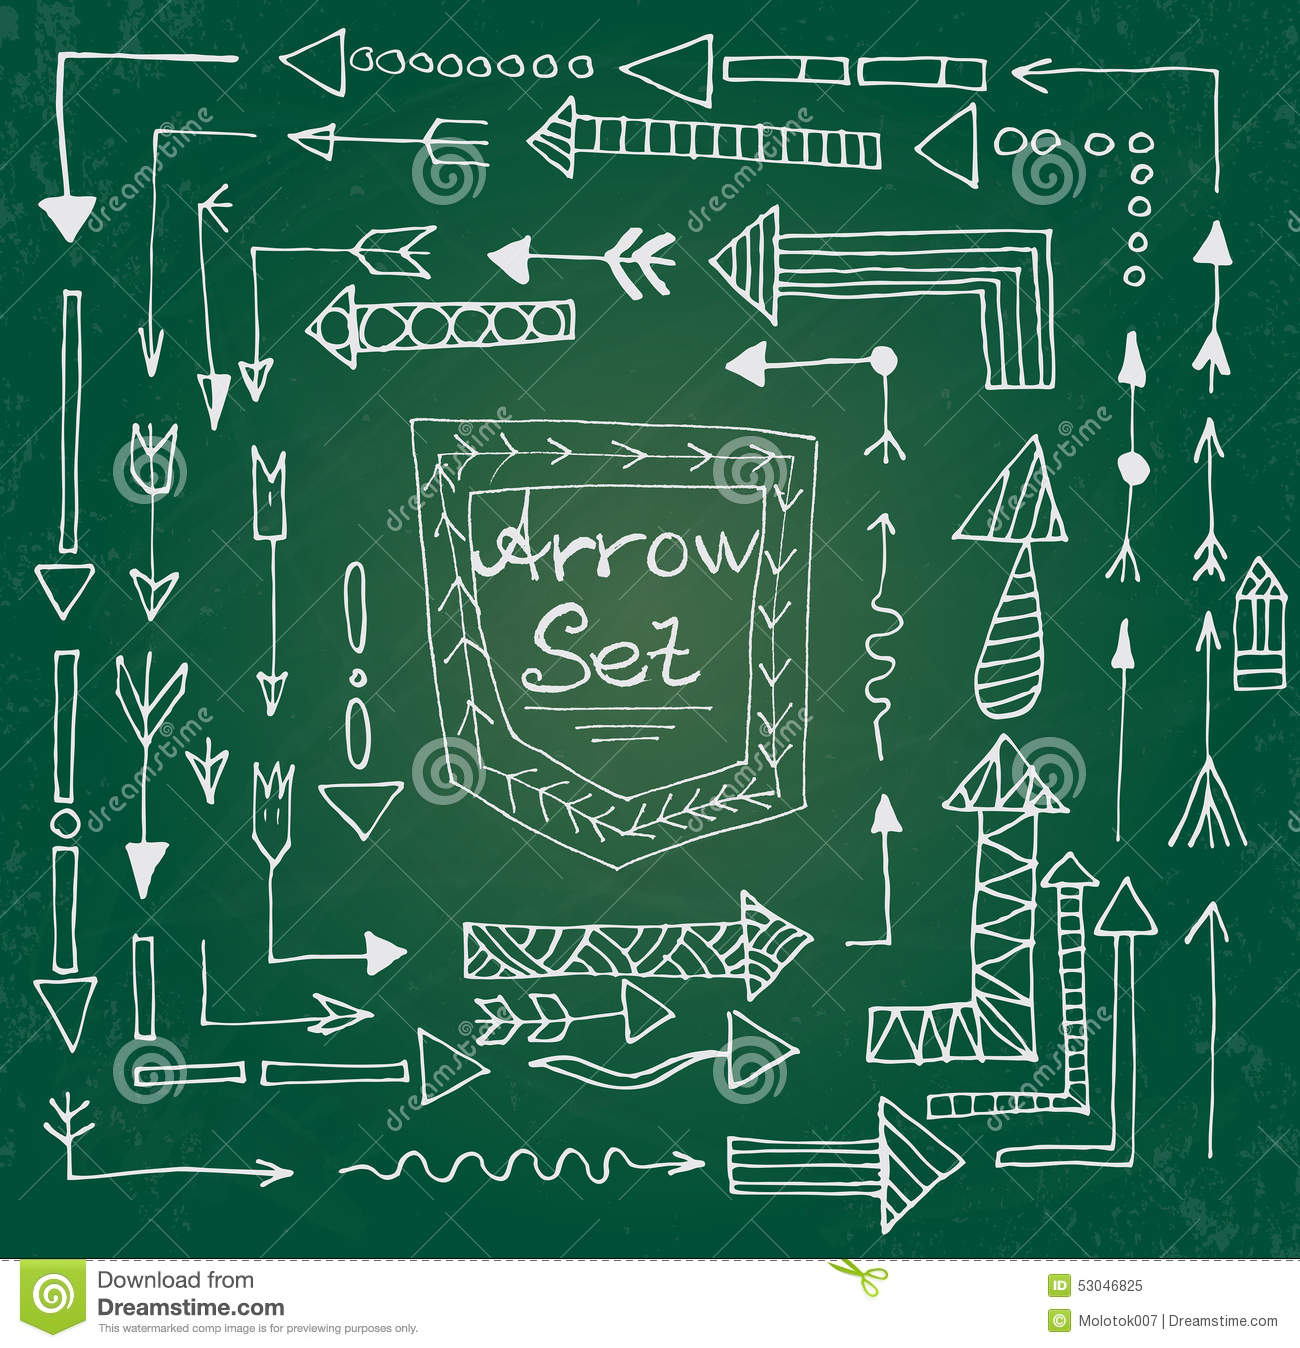 Hand Drawn Arrow Icons Set On Green Chalk Board Stock Vector   Image